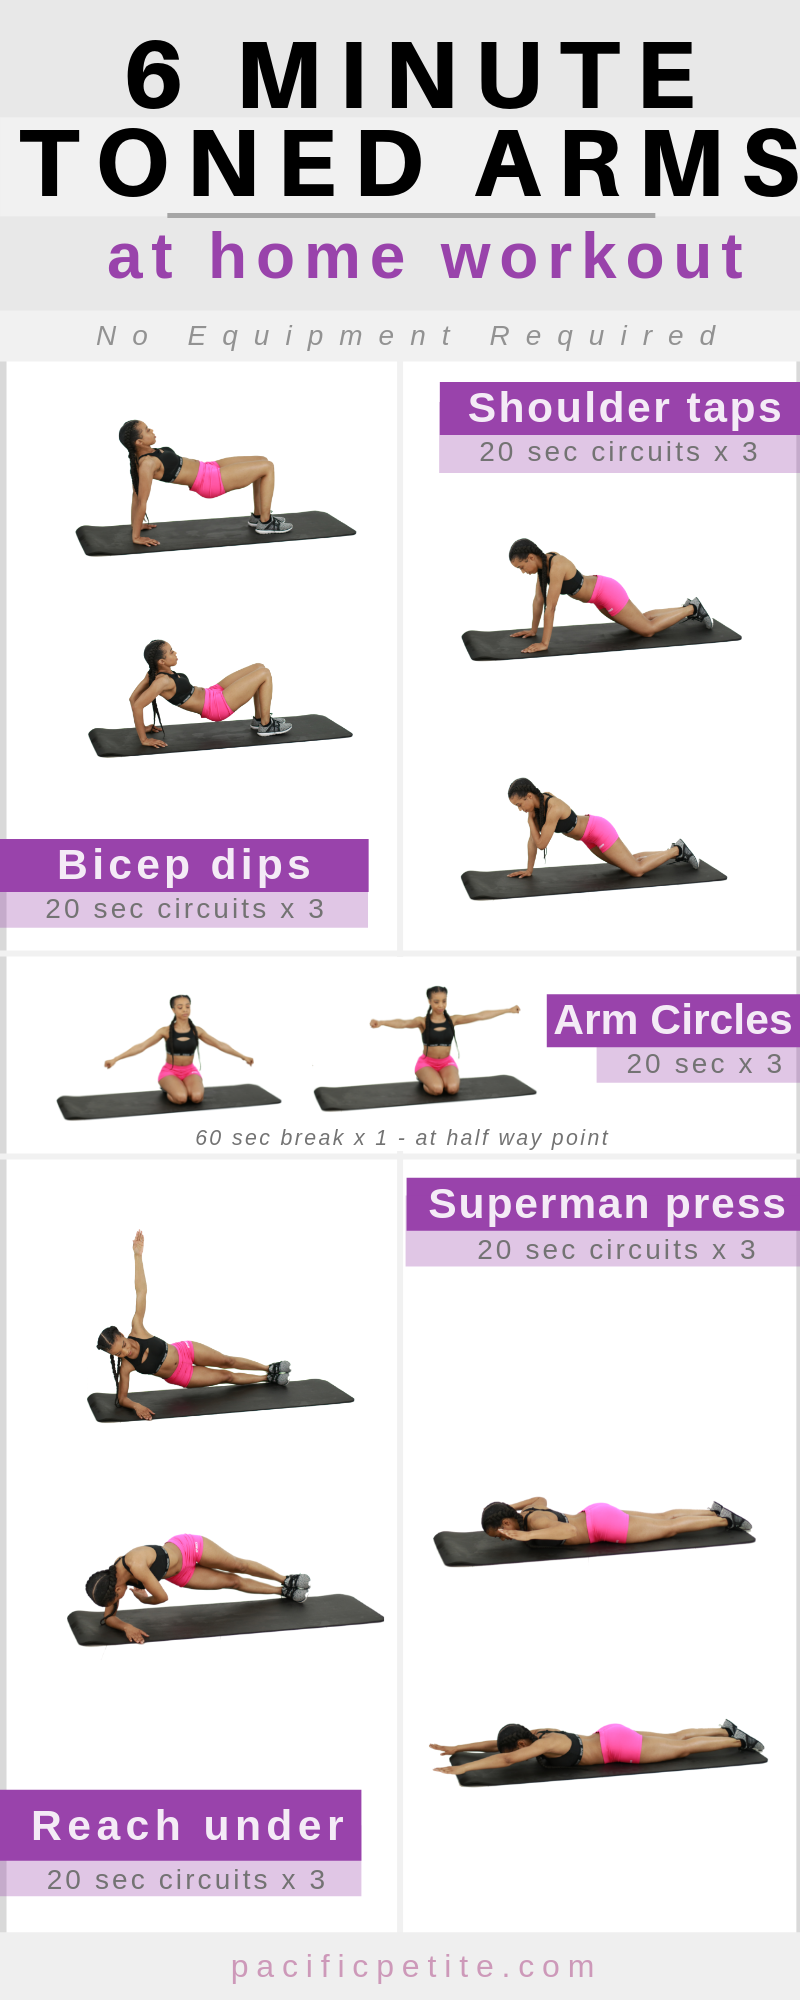 workout plan to tone arms at home, no equipment needed for women to get rid of flabby arms - workout plan to tone arms at home, no equipment needed for women to get rid of flabby arms -   17 fitness Routine arms ideas